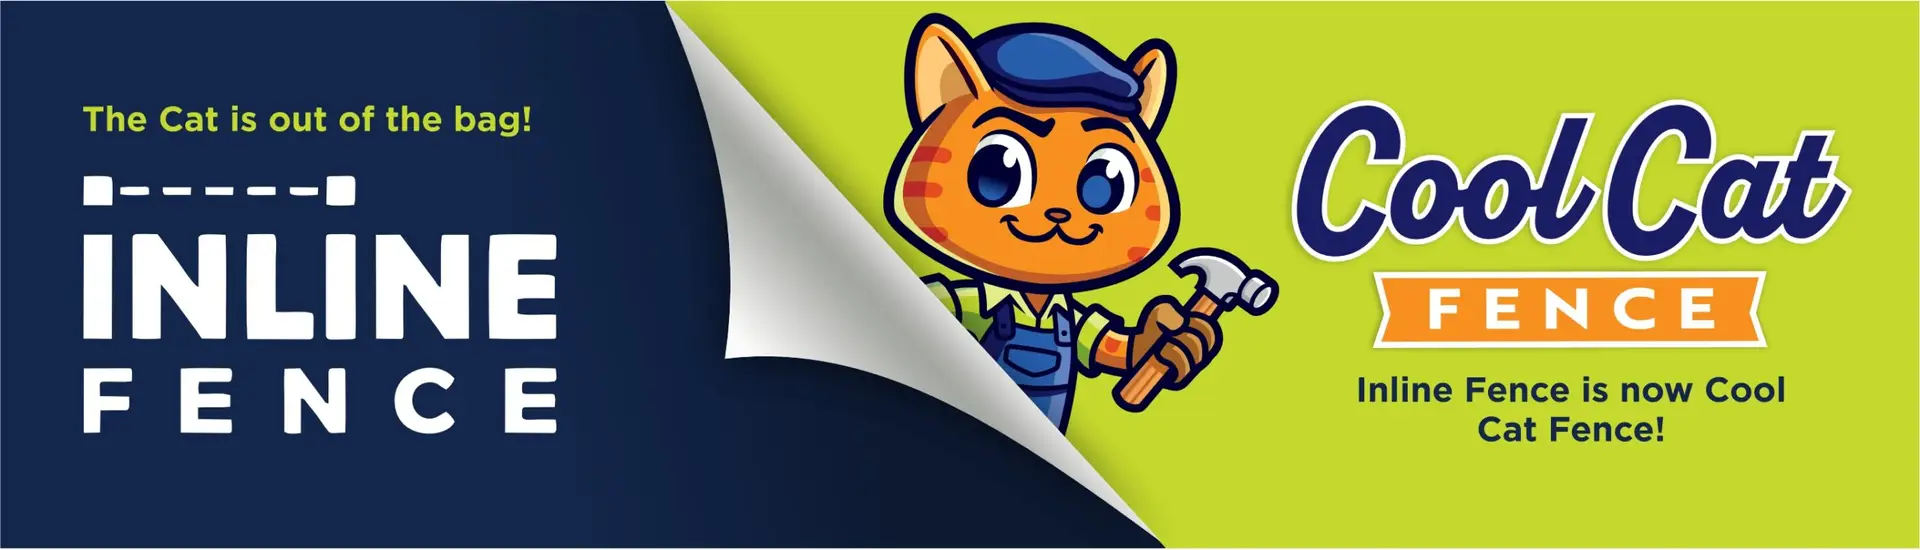 Inline Fence is now Cool Cat Fence Mobile Banner